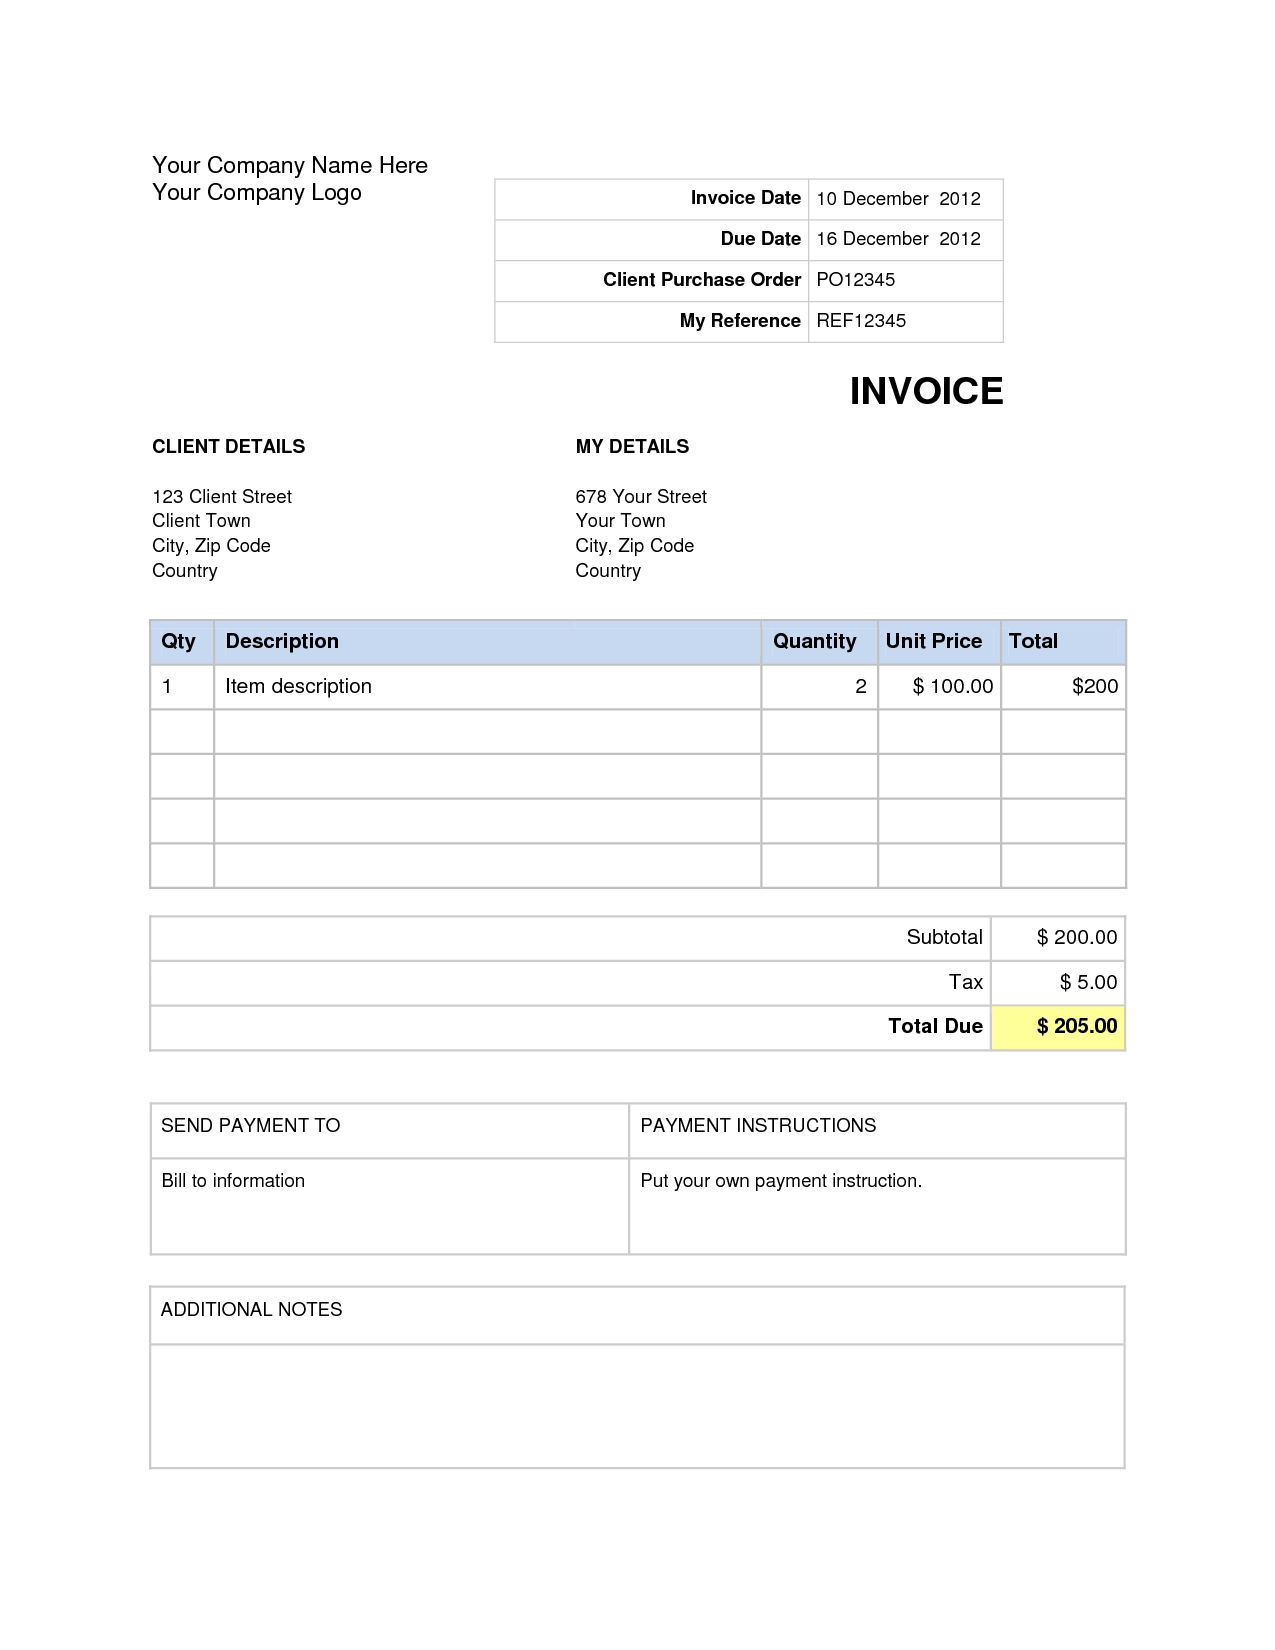 invoice template word 10 sample invoice microsoft word and common mistakes in making 1275 X 1650